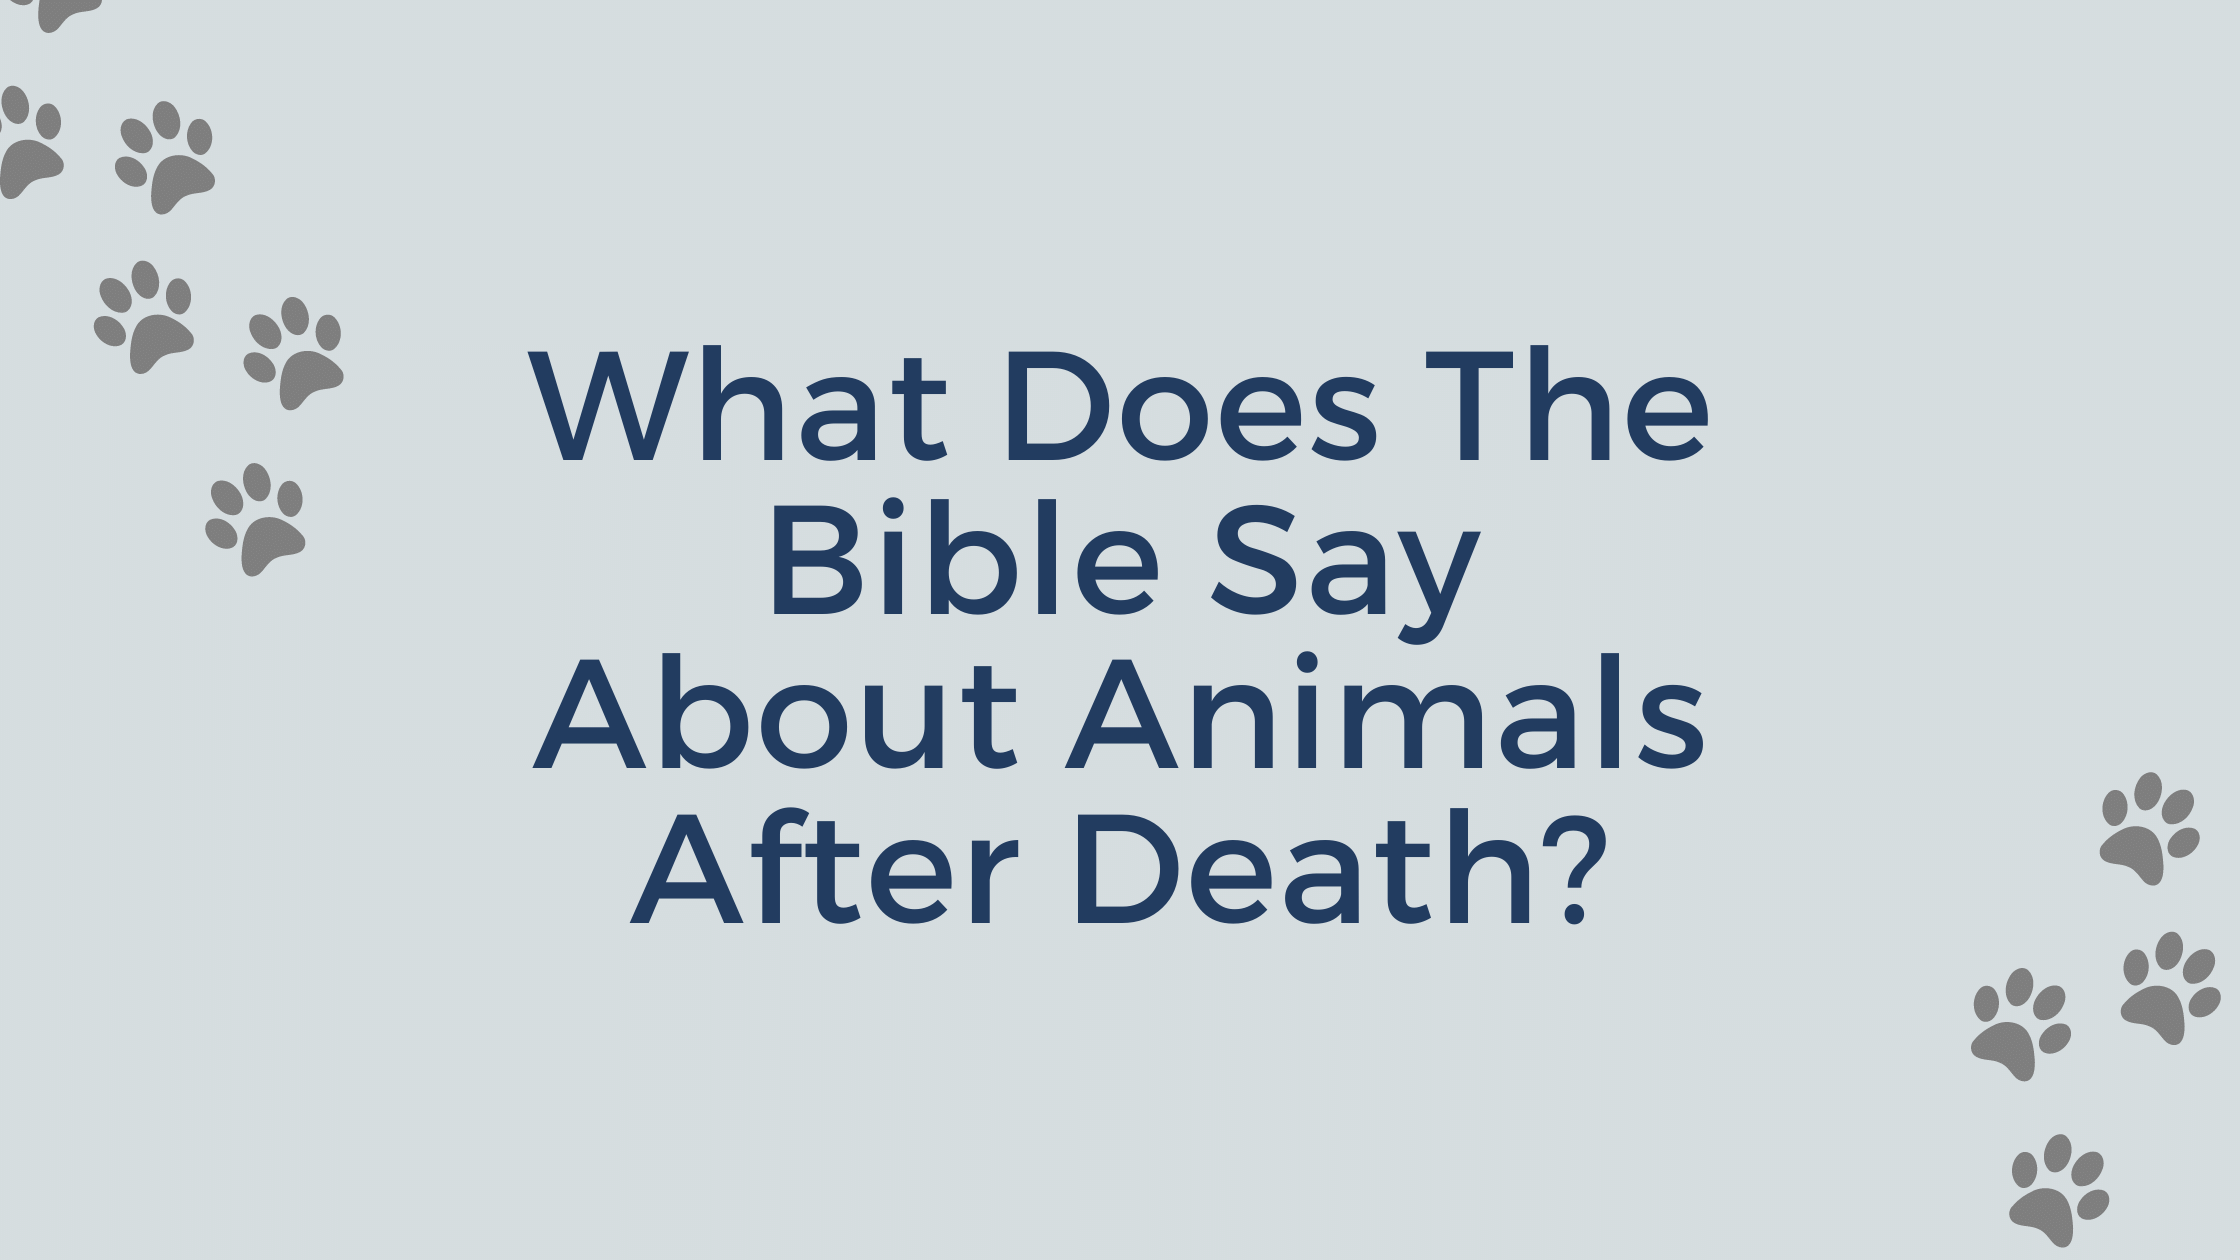 What Does The Bible Say About Animals After Death